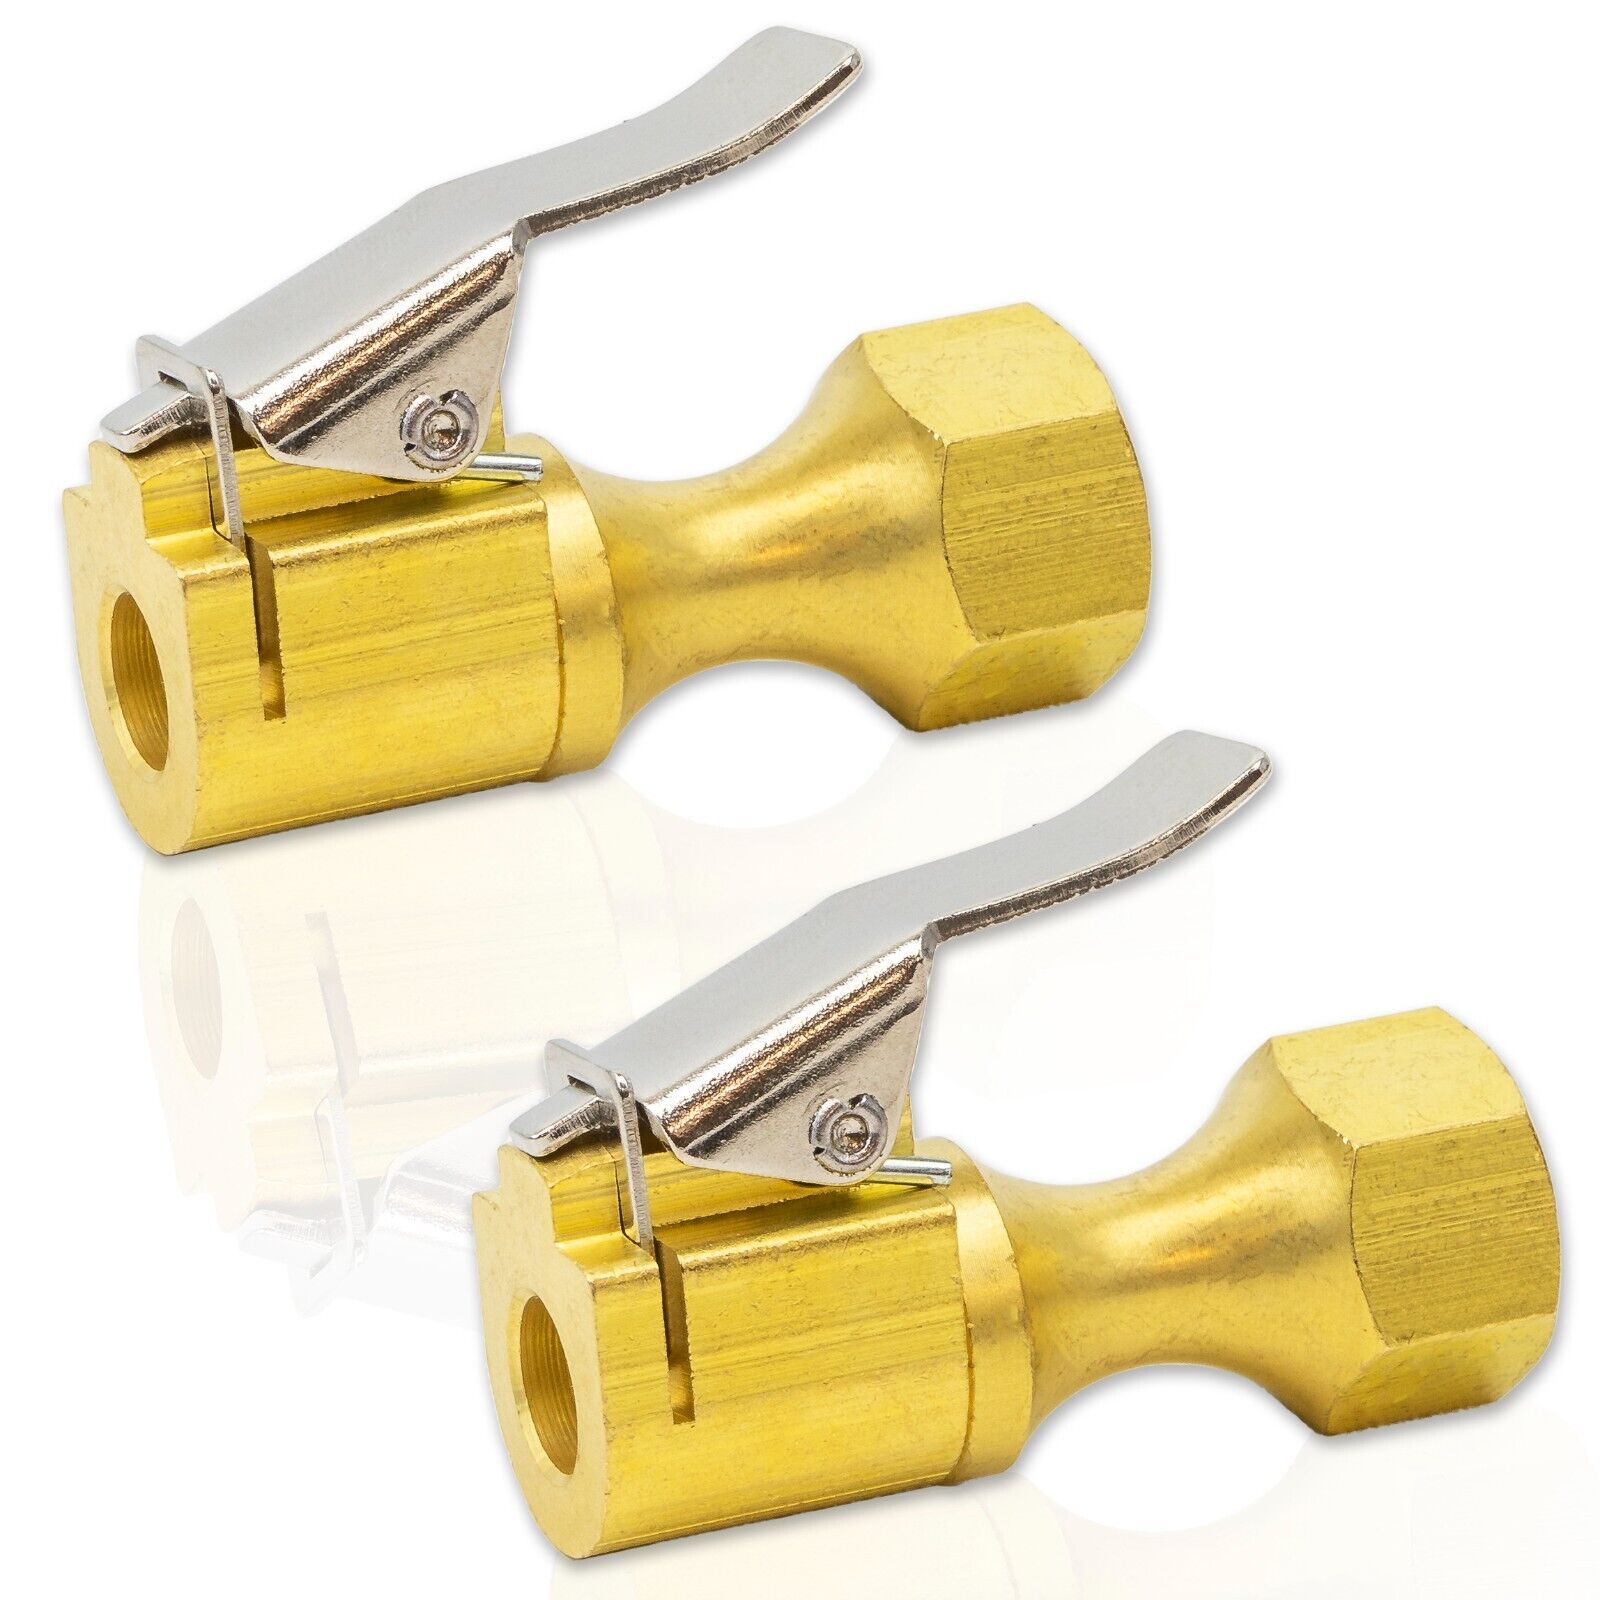 TGR 1/4” Heavy Duty Brass Air Chuck Lock-On Clip for Tire Inflator Gauge (2 Pack) - Tool Guy Republic